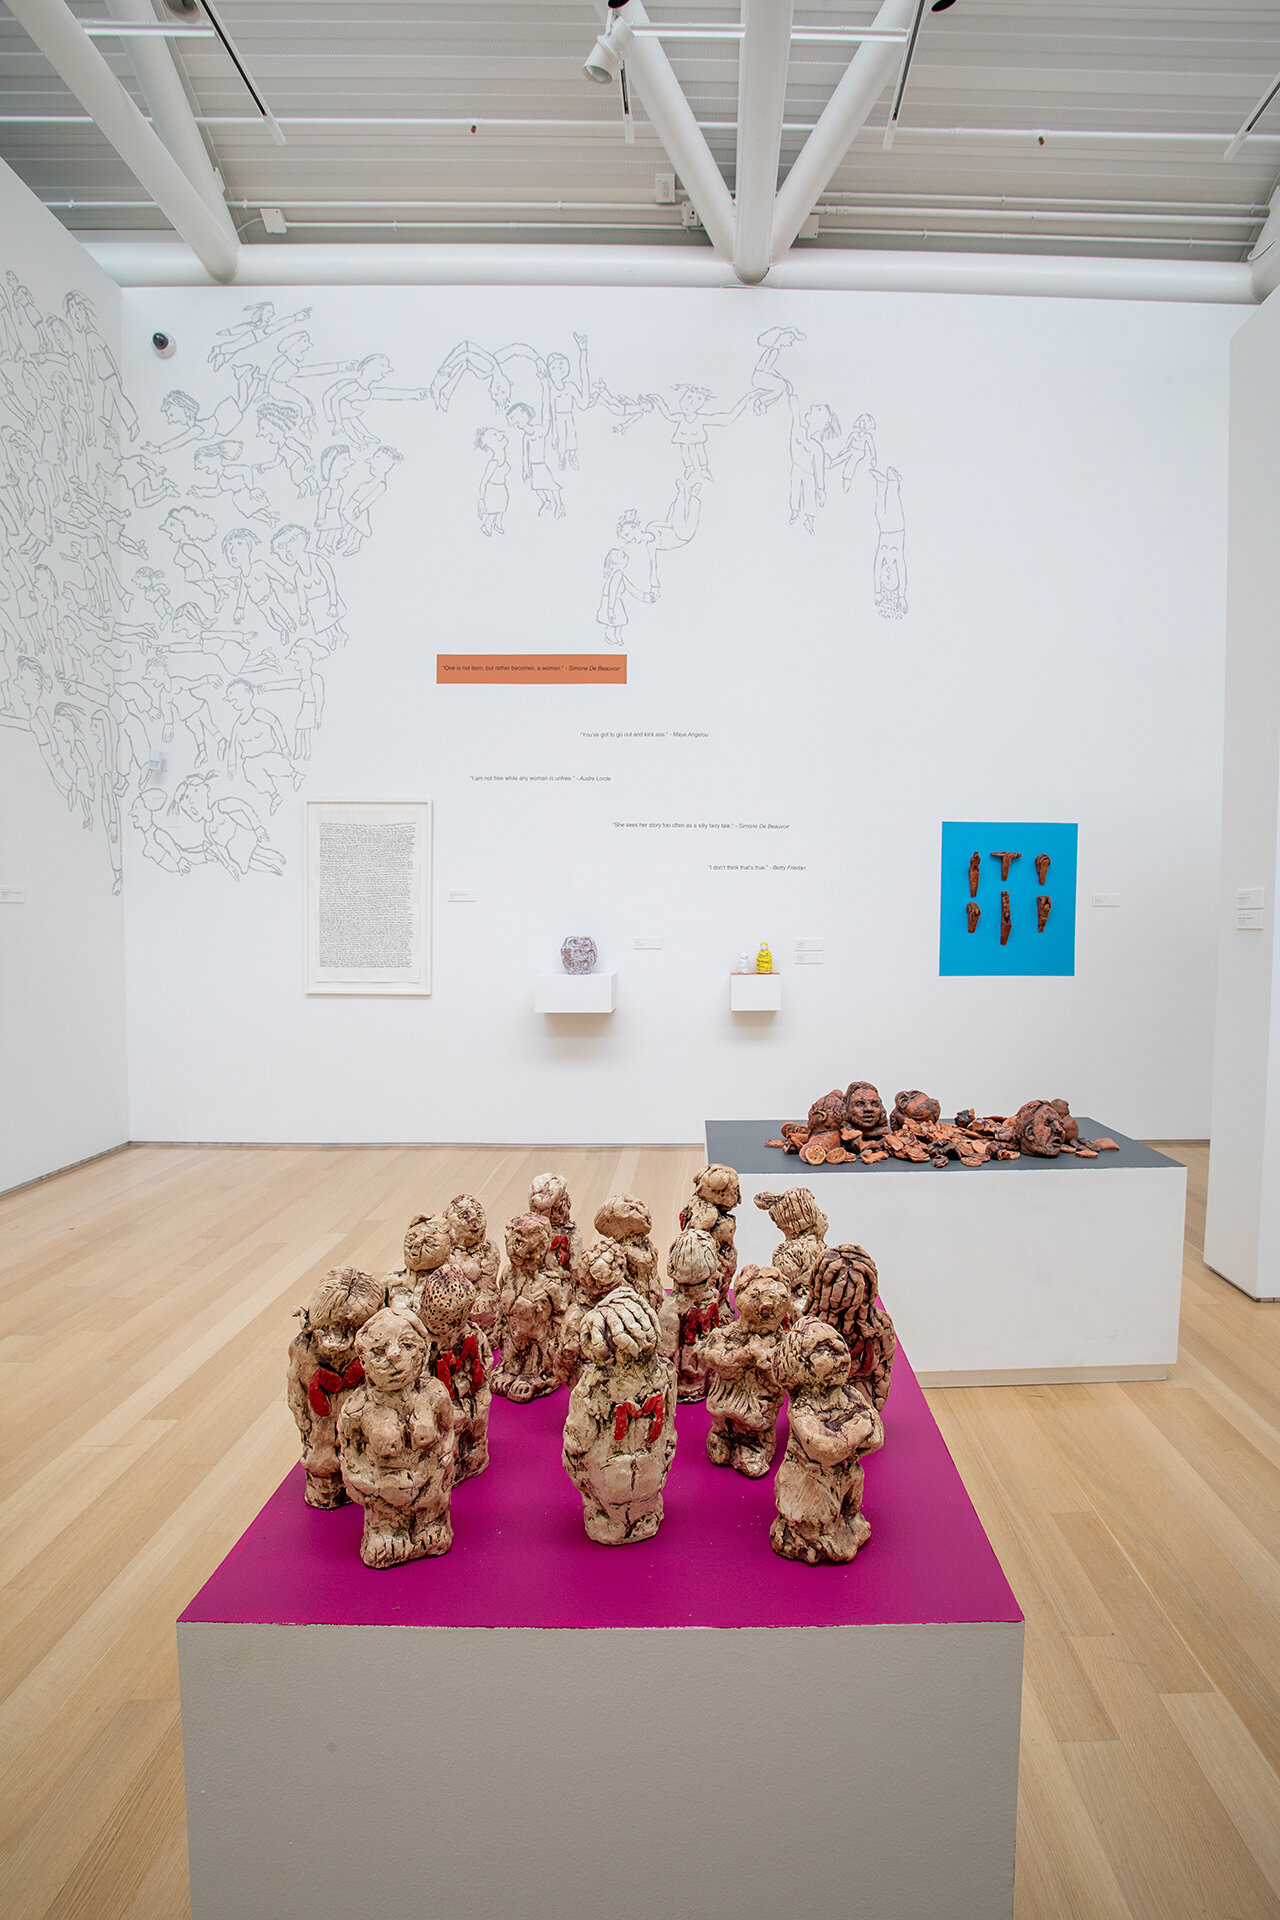 “For Girls Becoming Women; everyday encounters” (view 9), 2019, Solo Exhibition Installation, Gund Gallery, Kenyon College, Gambier, Ohio